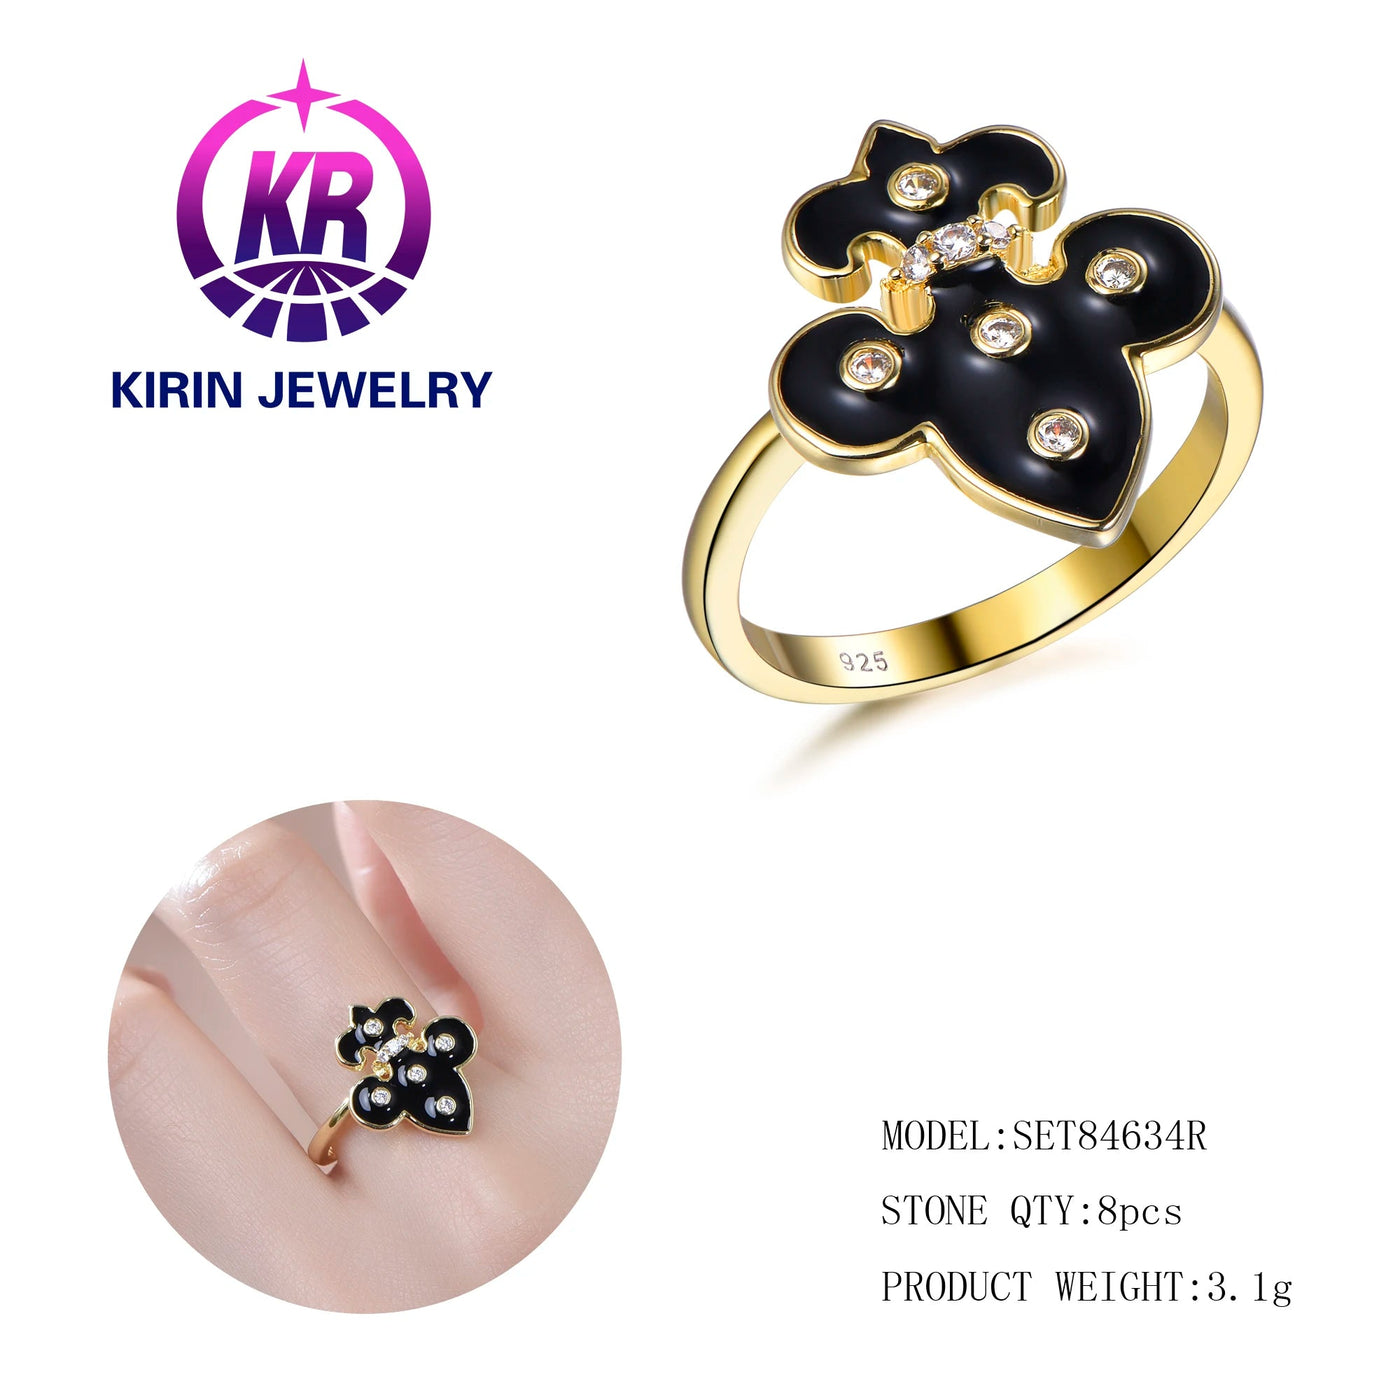 Brand new high-quality irregular dark earrings adorned with sparkling diamonds and 14K18K gold, suitable for women's jewelry Kirin Jewelry